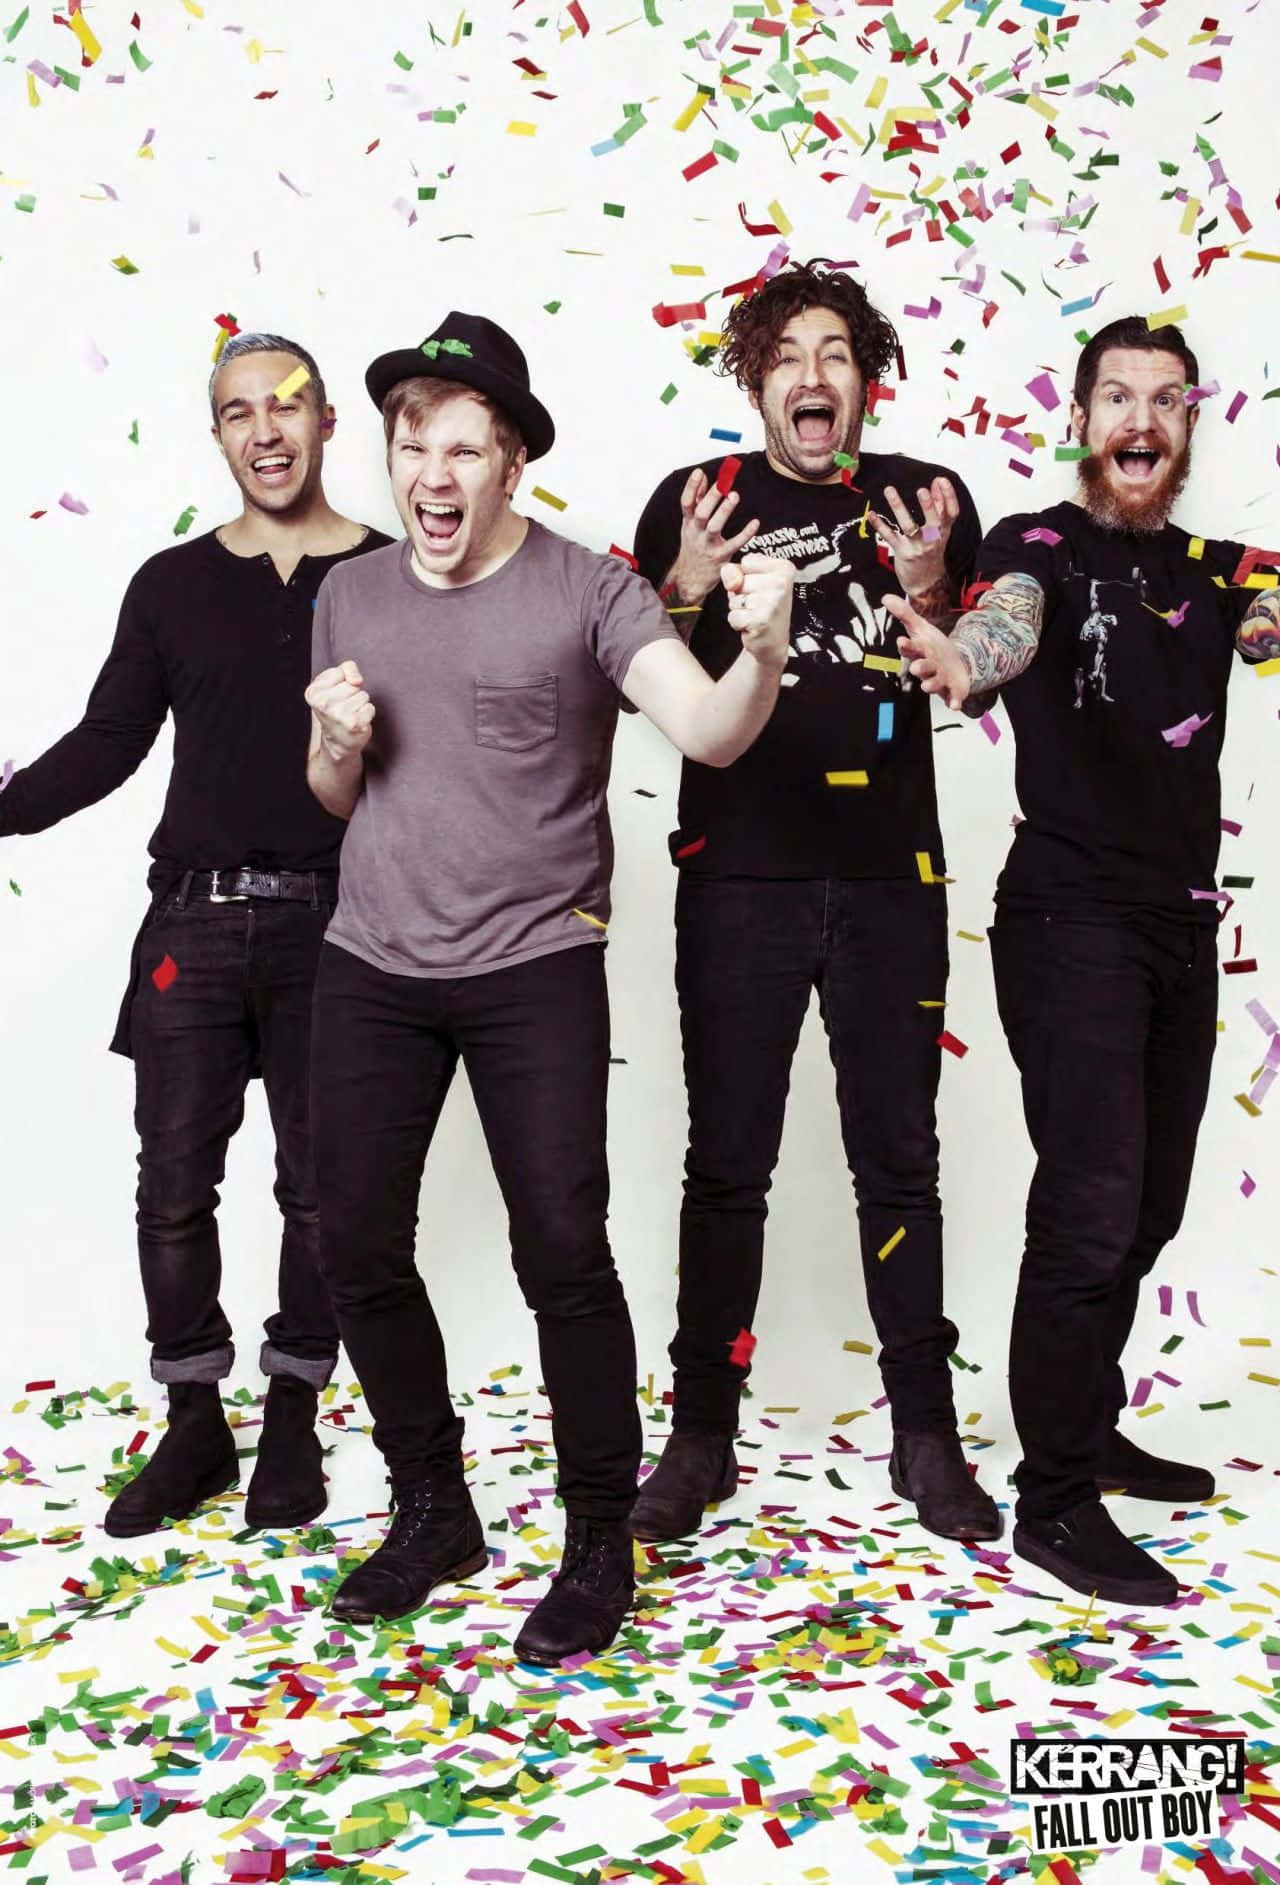 Come see the modern rock group Fall Out Boy as they play their electric show. Wallpaper